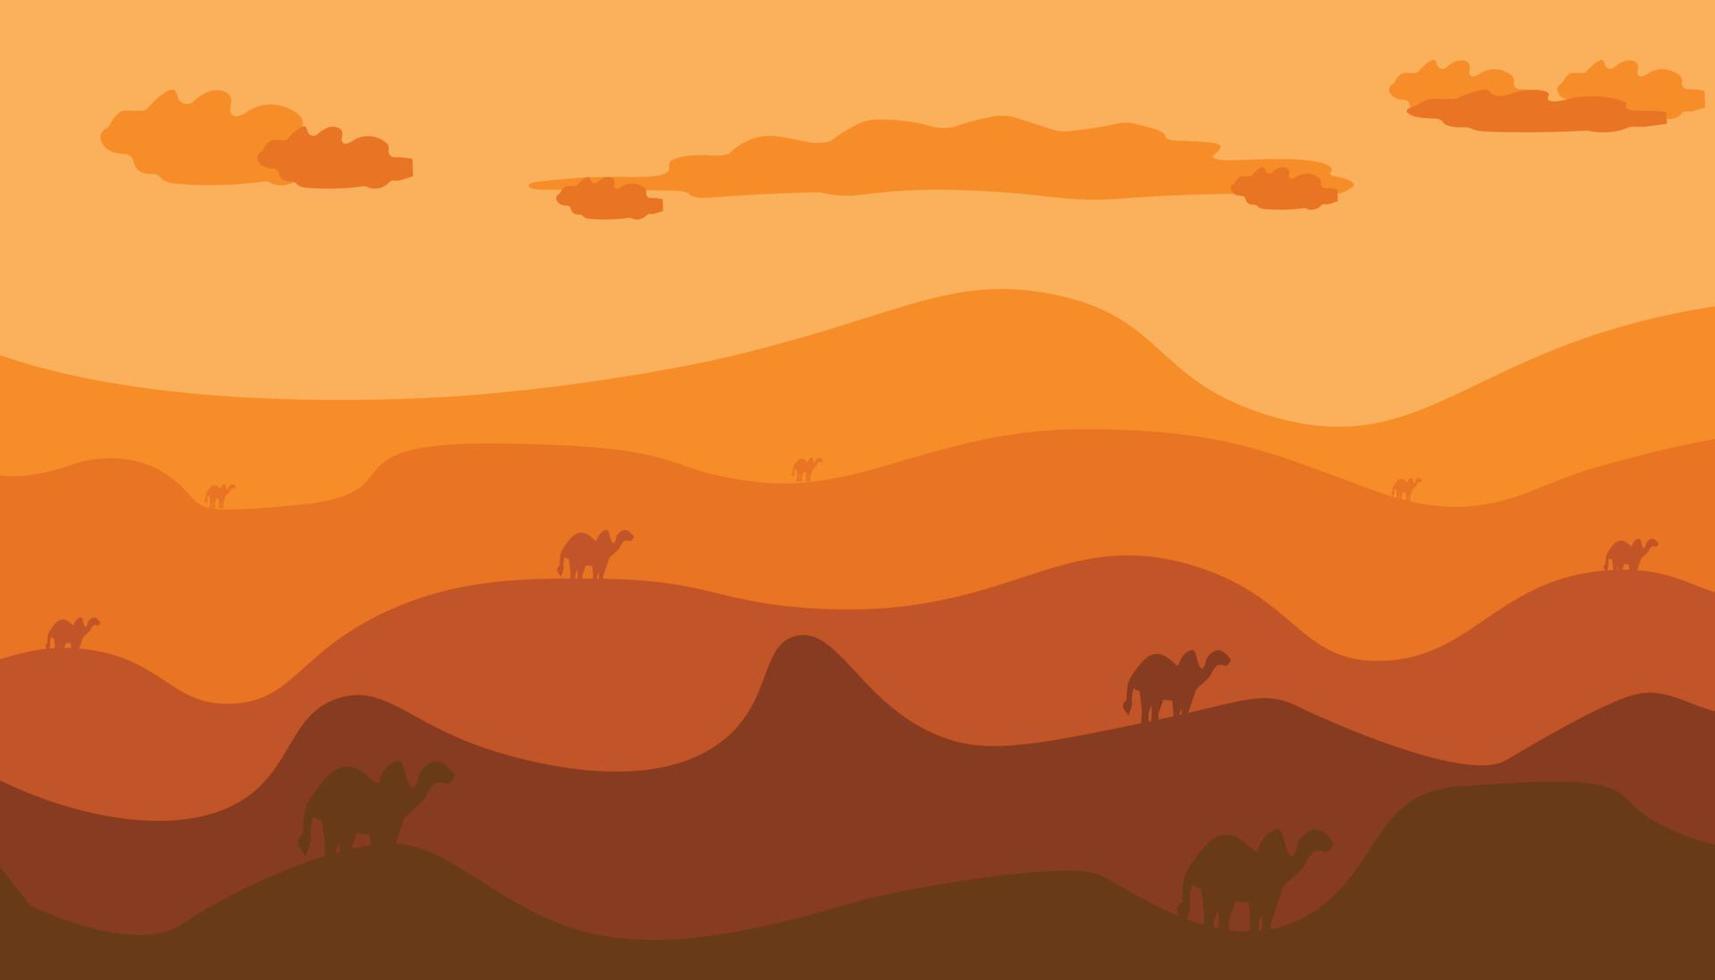 background illustration of desert, camel, cloud and brown color. vector design which is very suitable for websites, apps, printing.